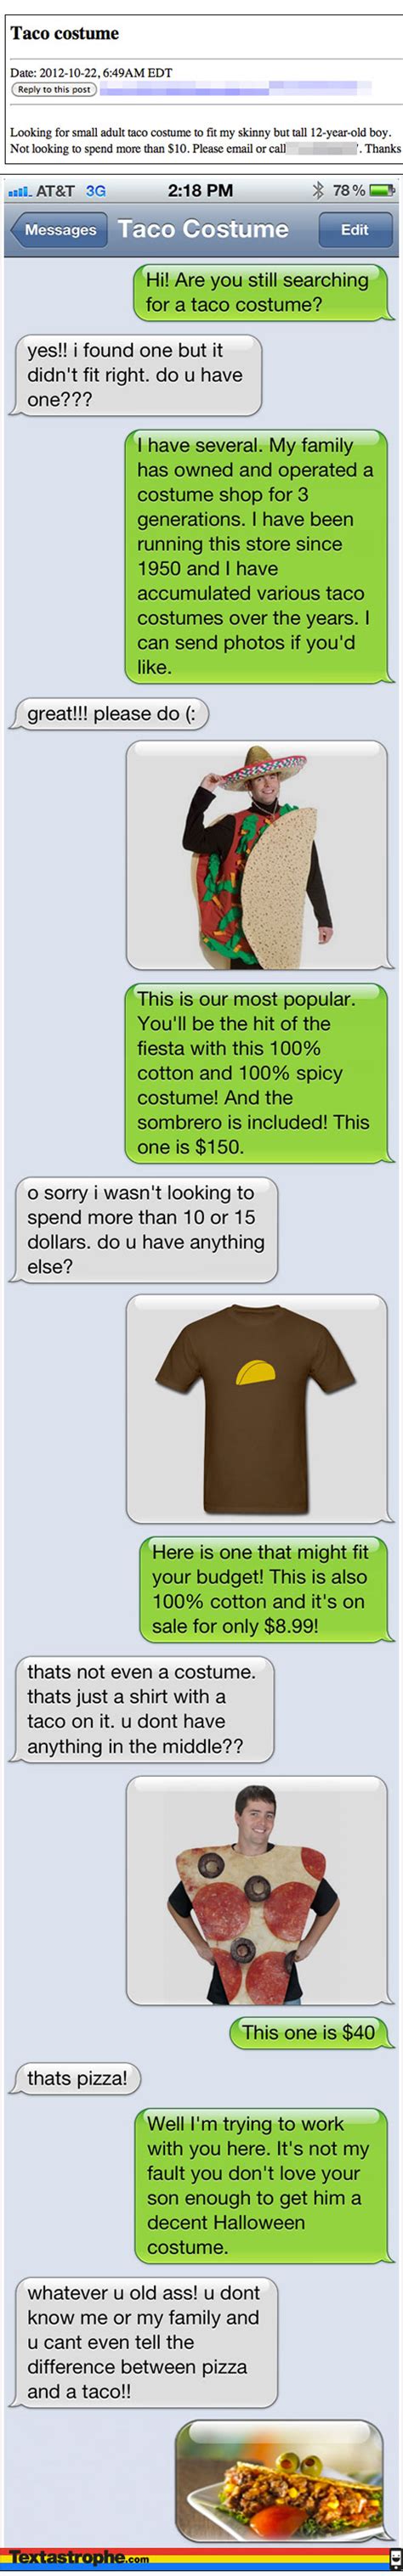 The 10 Best Texting Pranks Ever